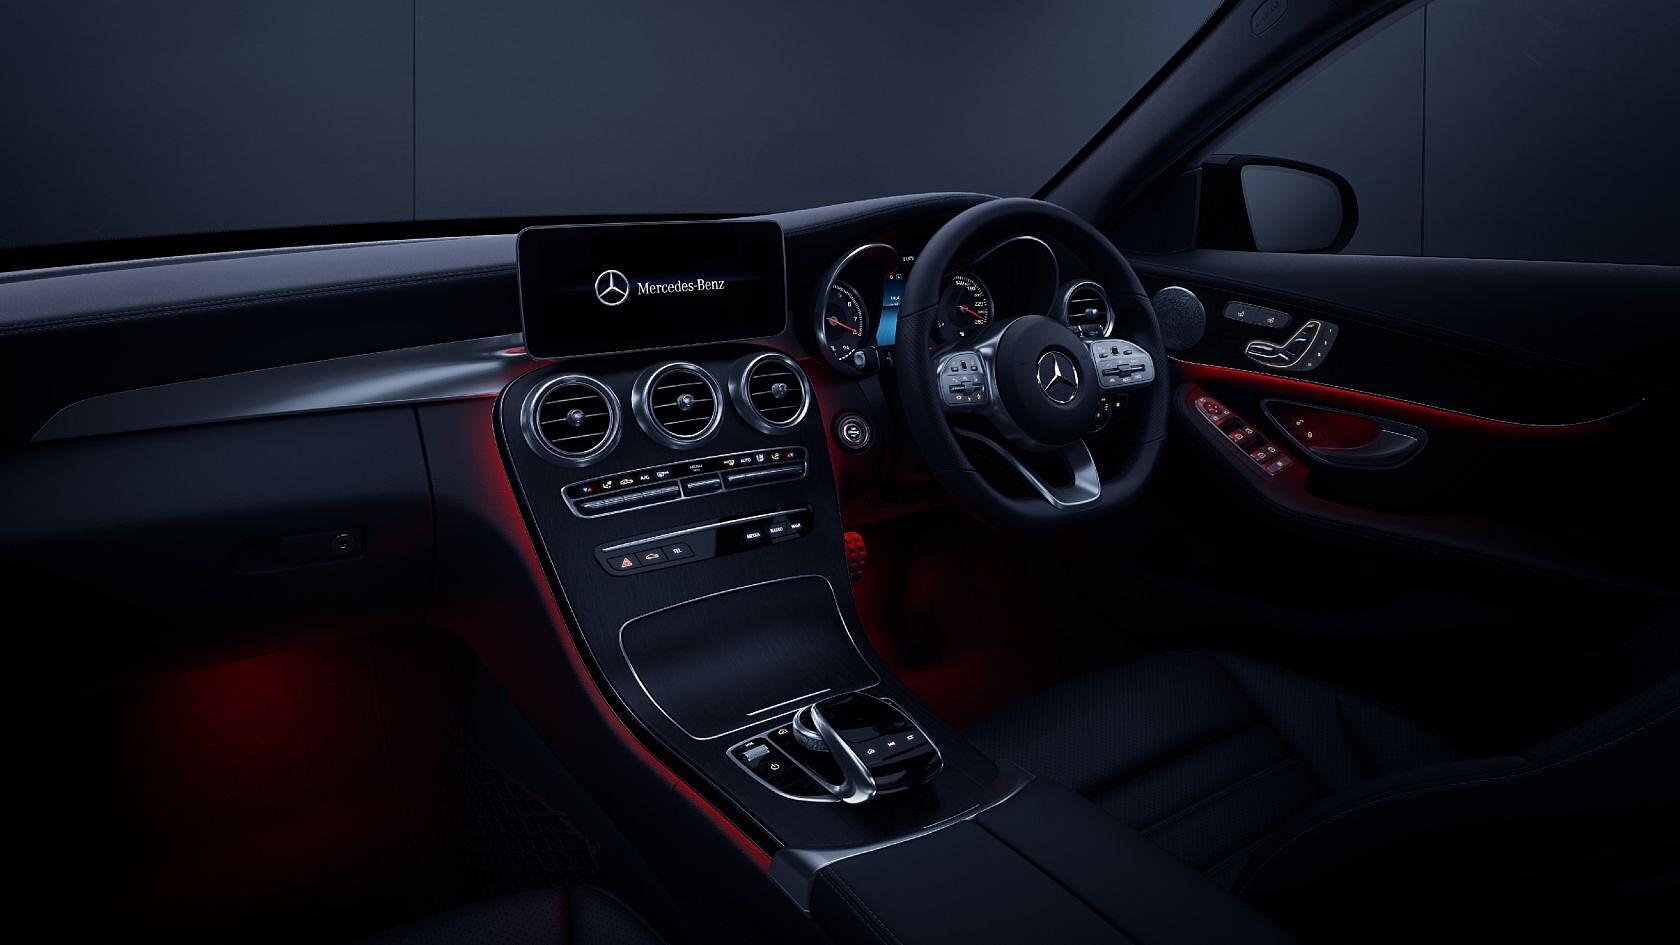 Mercedes Benz C Class Images Interior Exterior Photo Gallery 200 Images Carwale